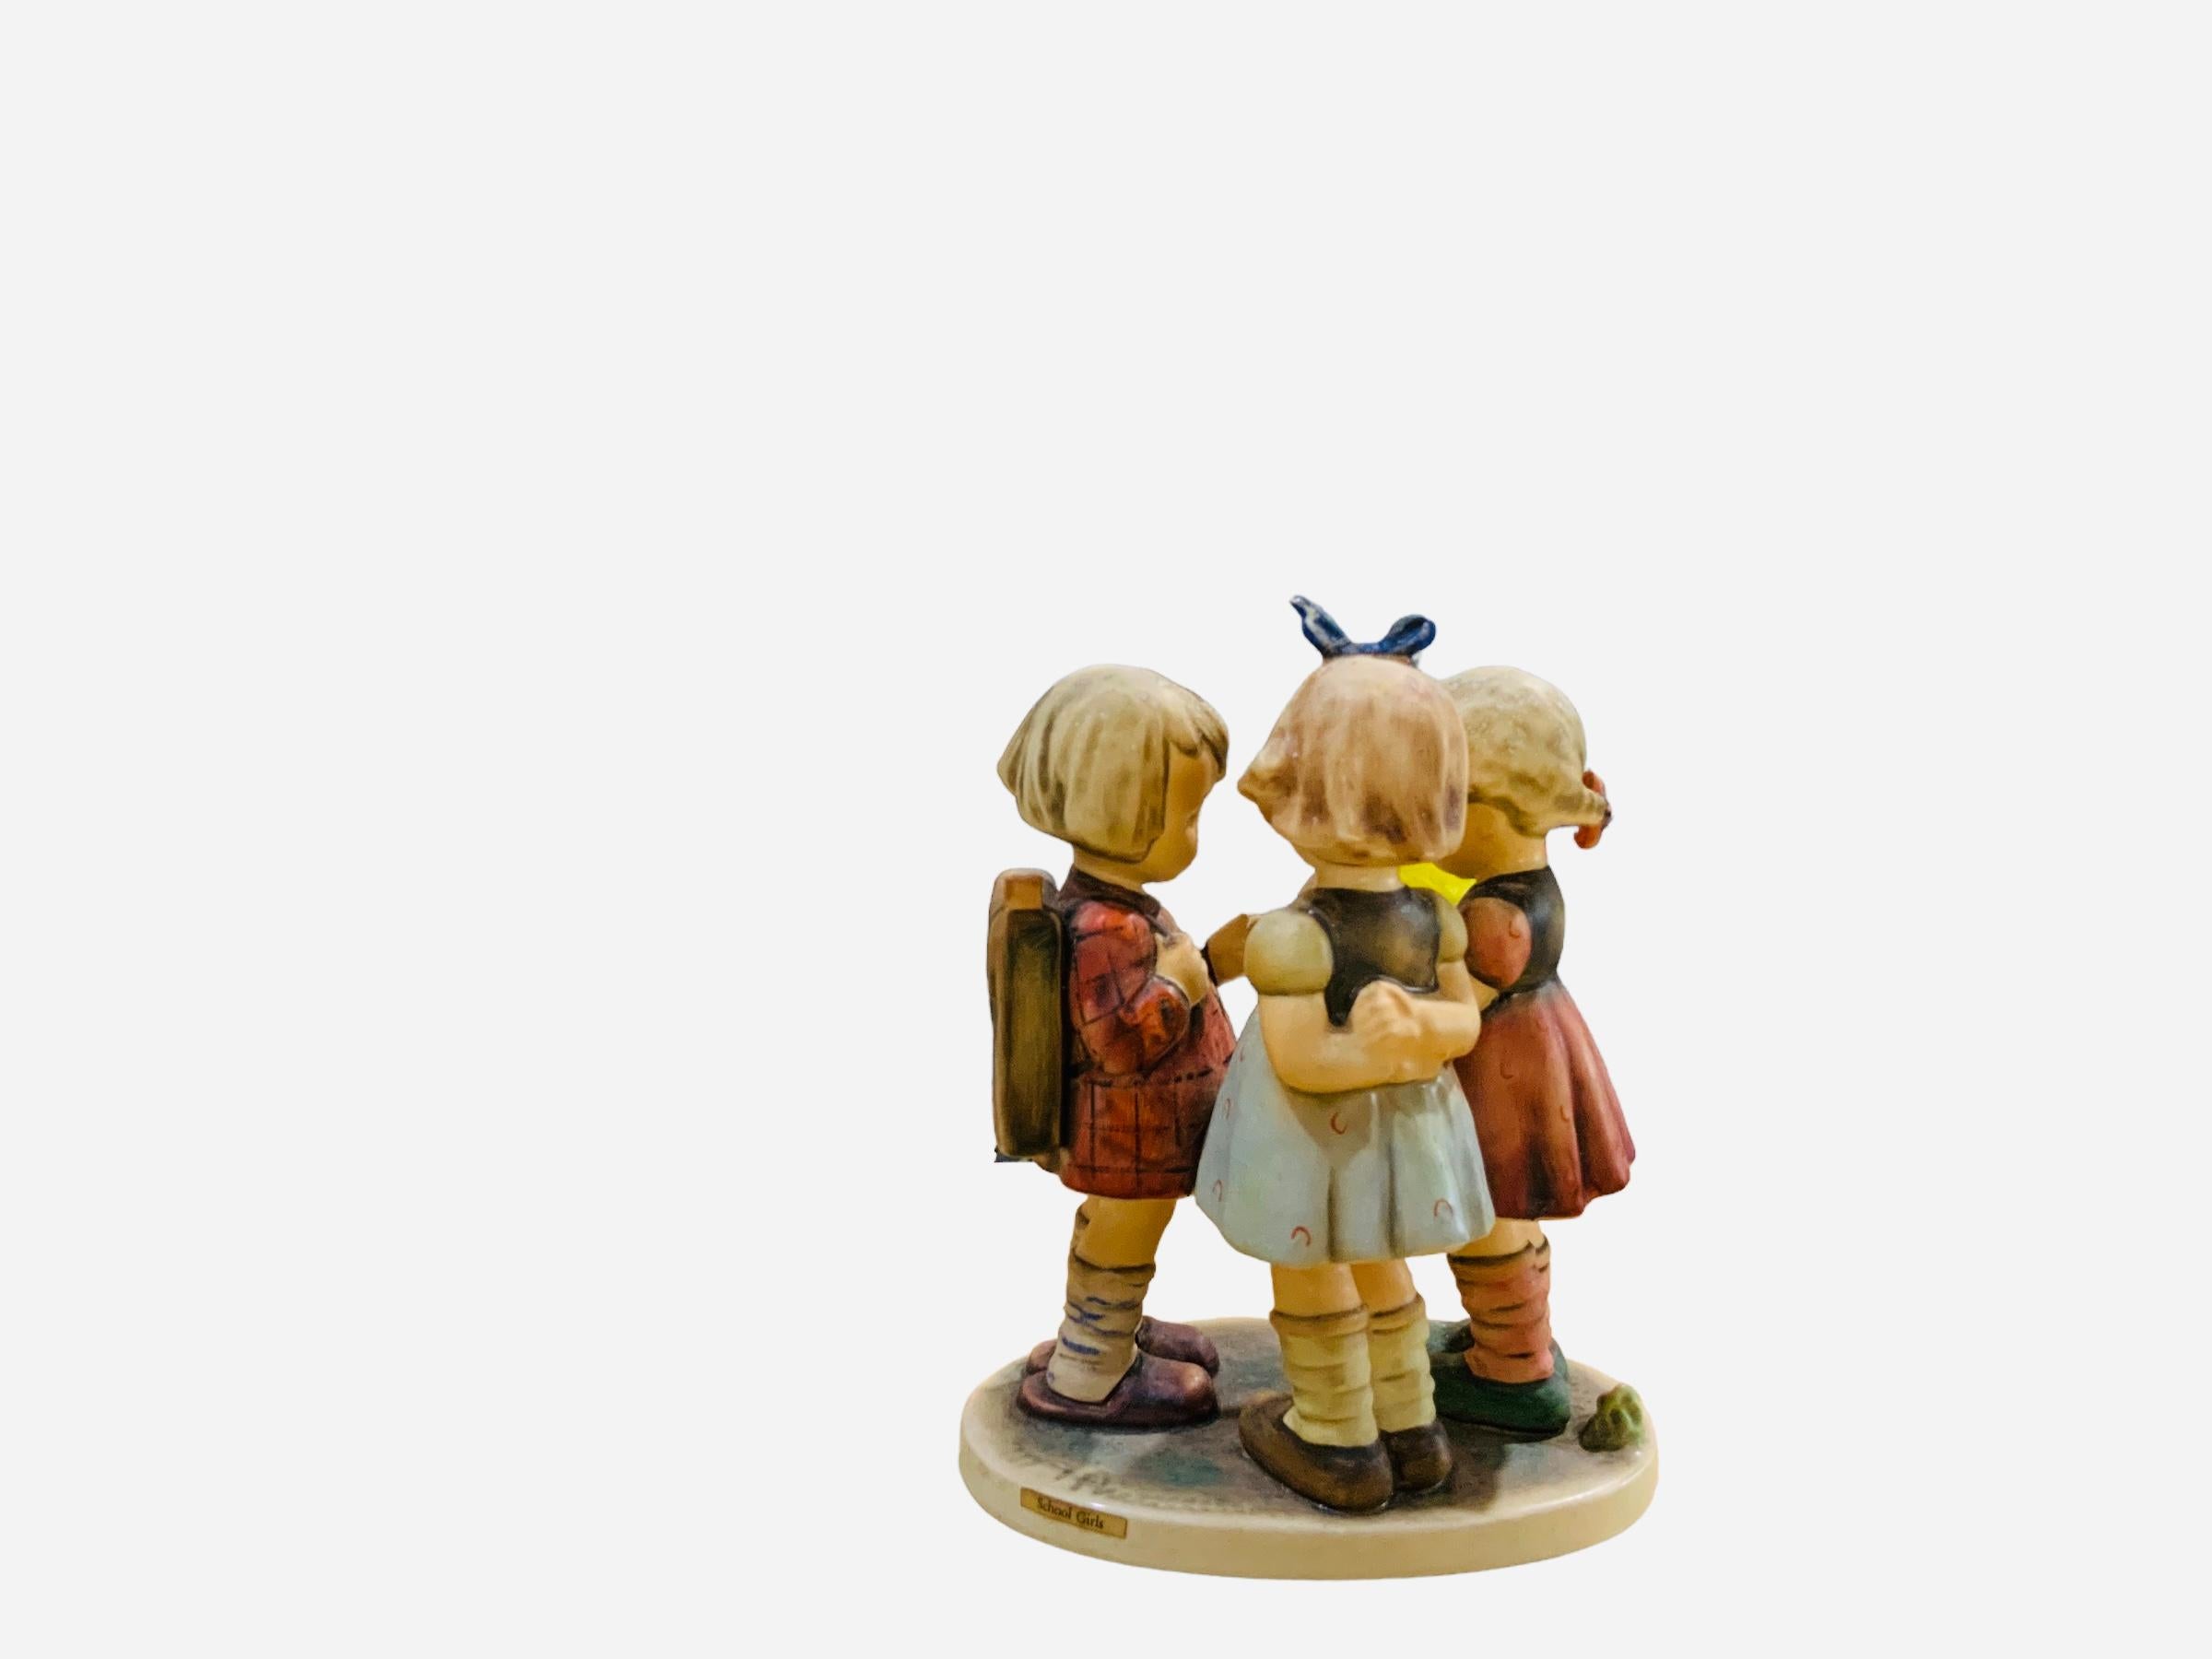 This is a Hummel porcelain group figurines of three girls. It’s named “School Girls”. Its mark is TMK5 (1970’s). The inscription M.I. Hummel is in the back of the figurine. The trademark of Goebel company is below the base.